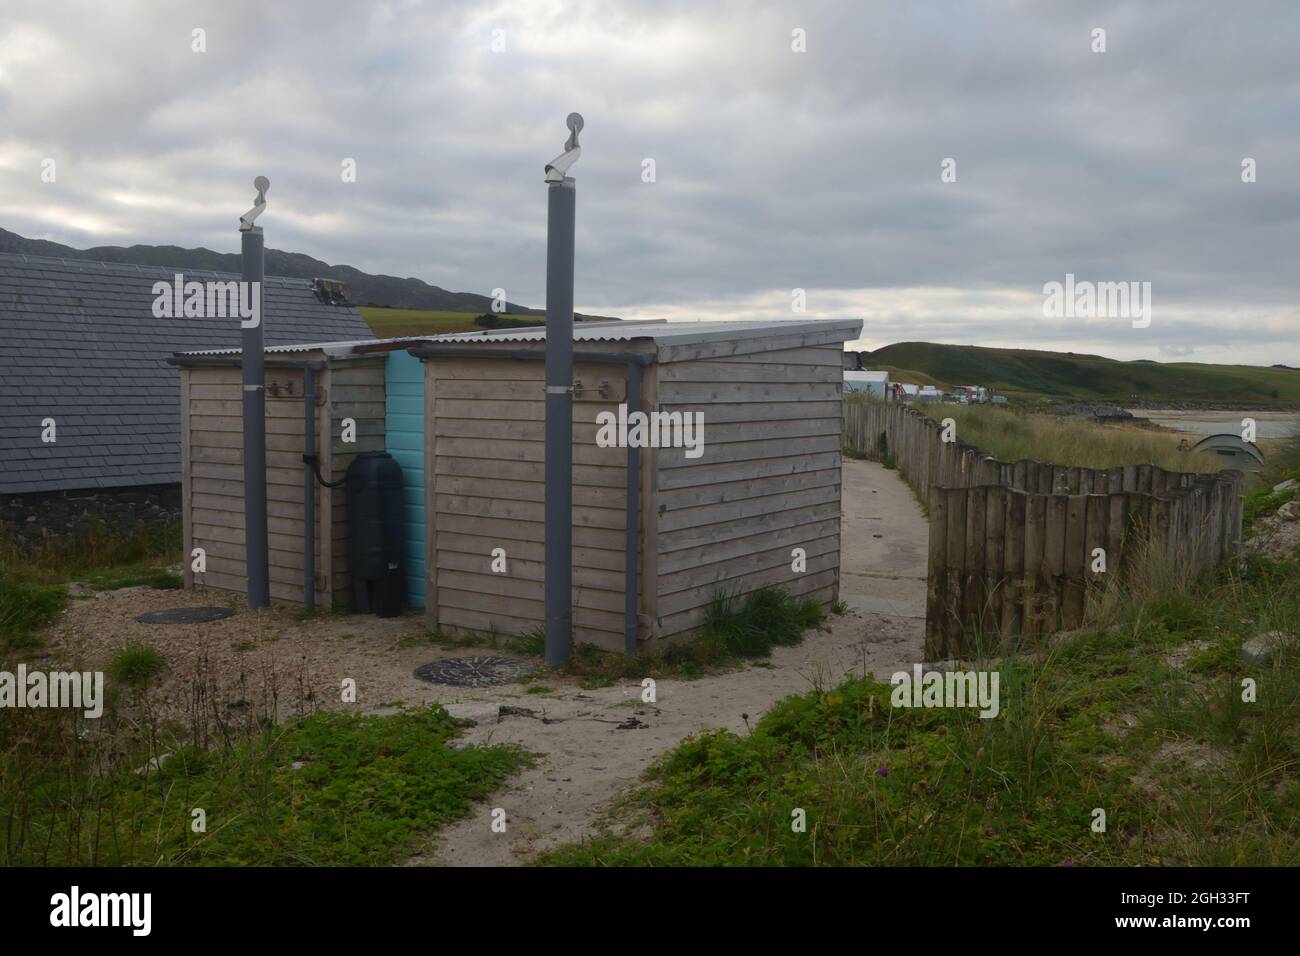 An off-grid, water-free, composting public toilet block, near Arisaig on the west coast of Scotland Stock Photo